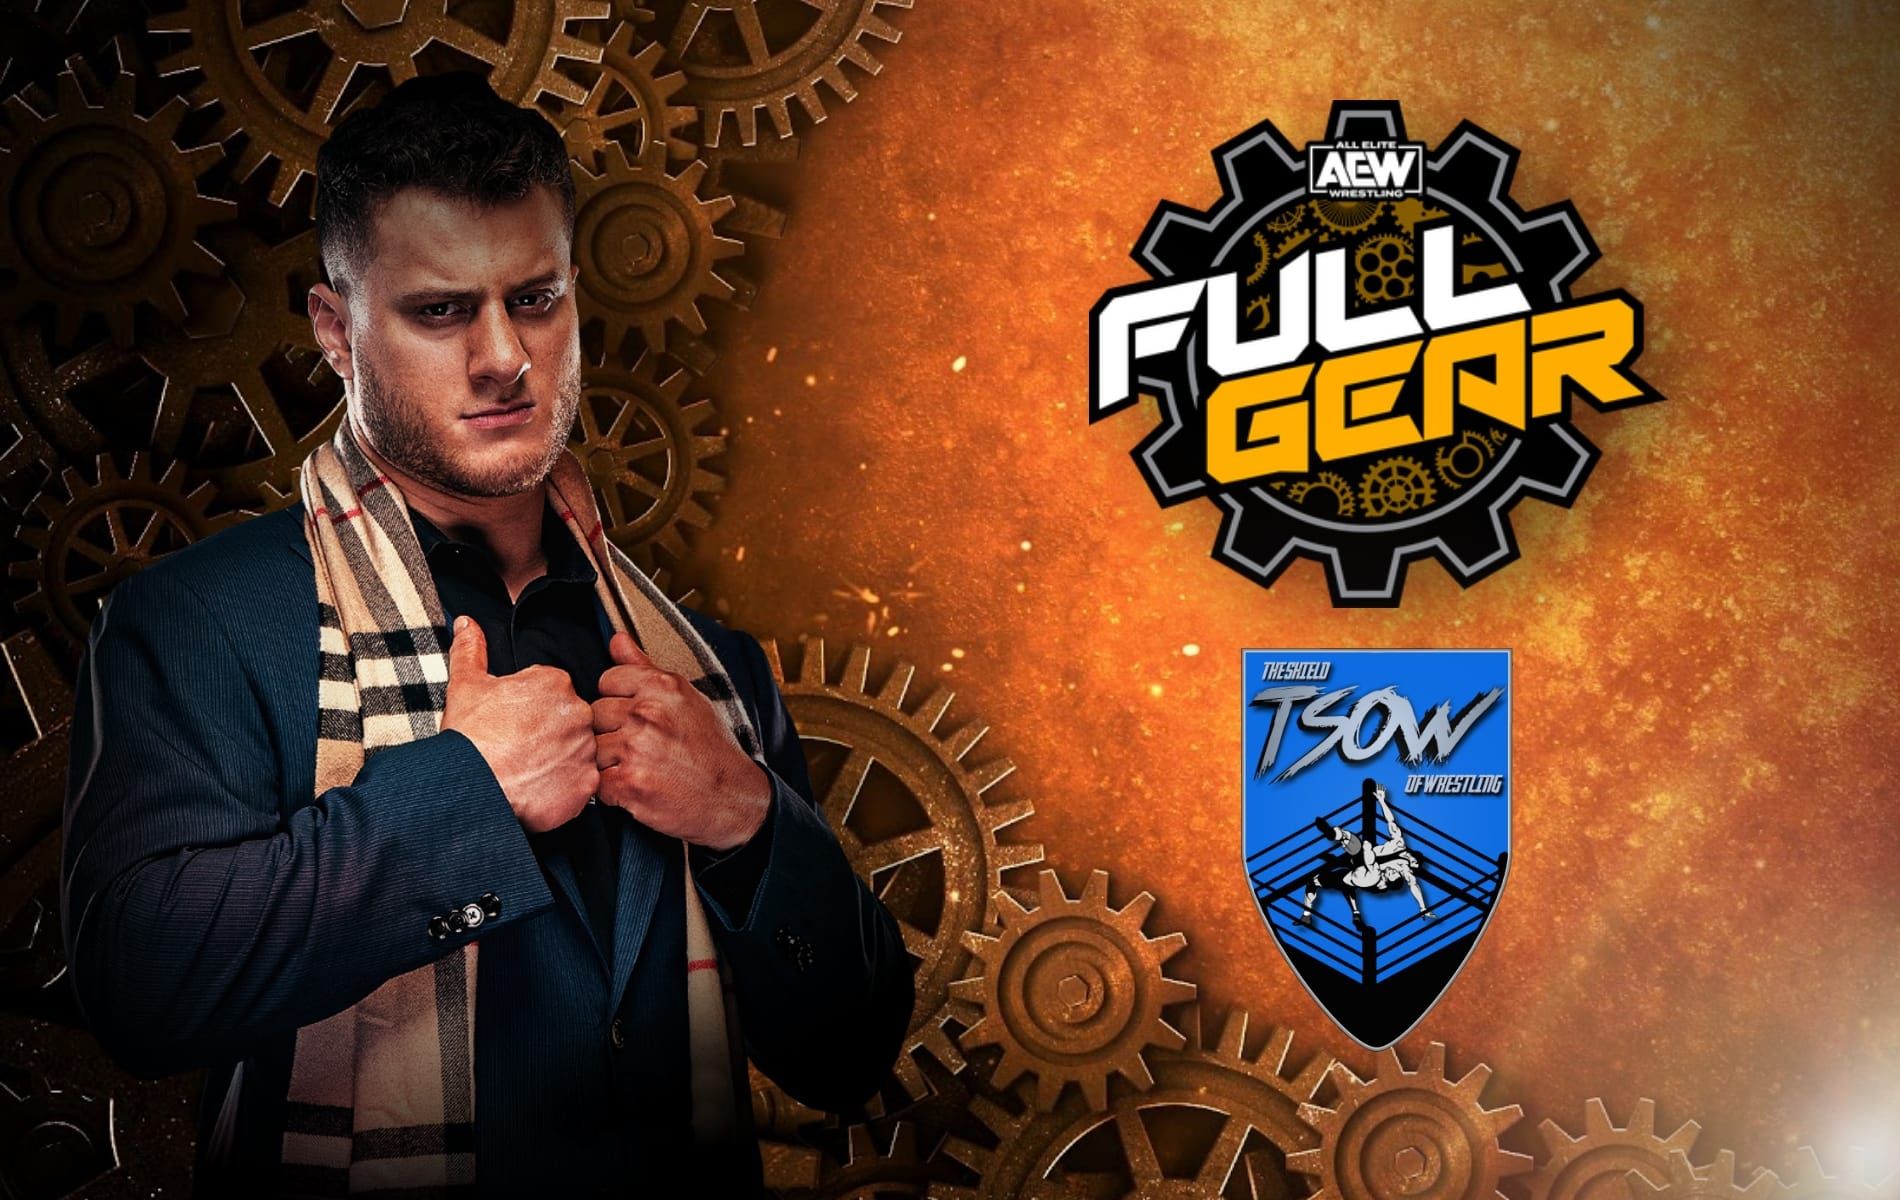 AEW Presents Full Gear in Newark at Prudential Center